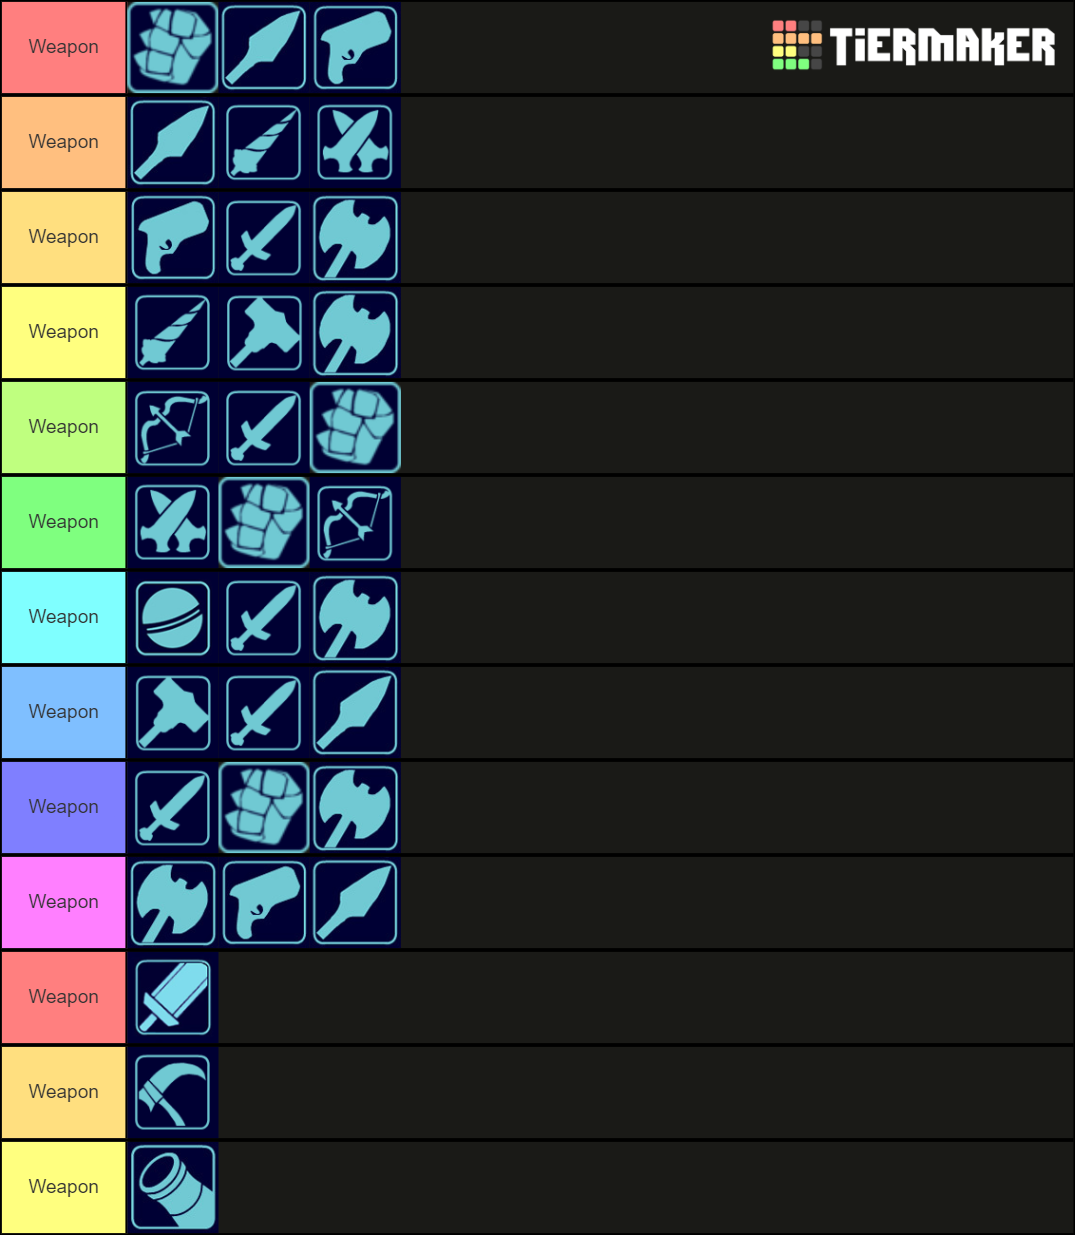 Brawlhalla Weapon Counter Tier List Rankings) TierMaker